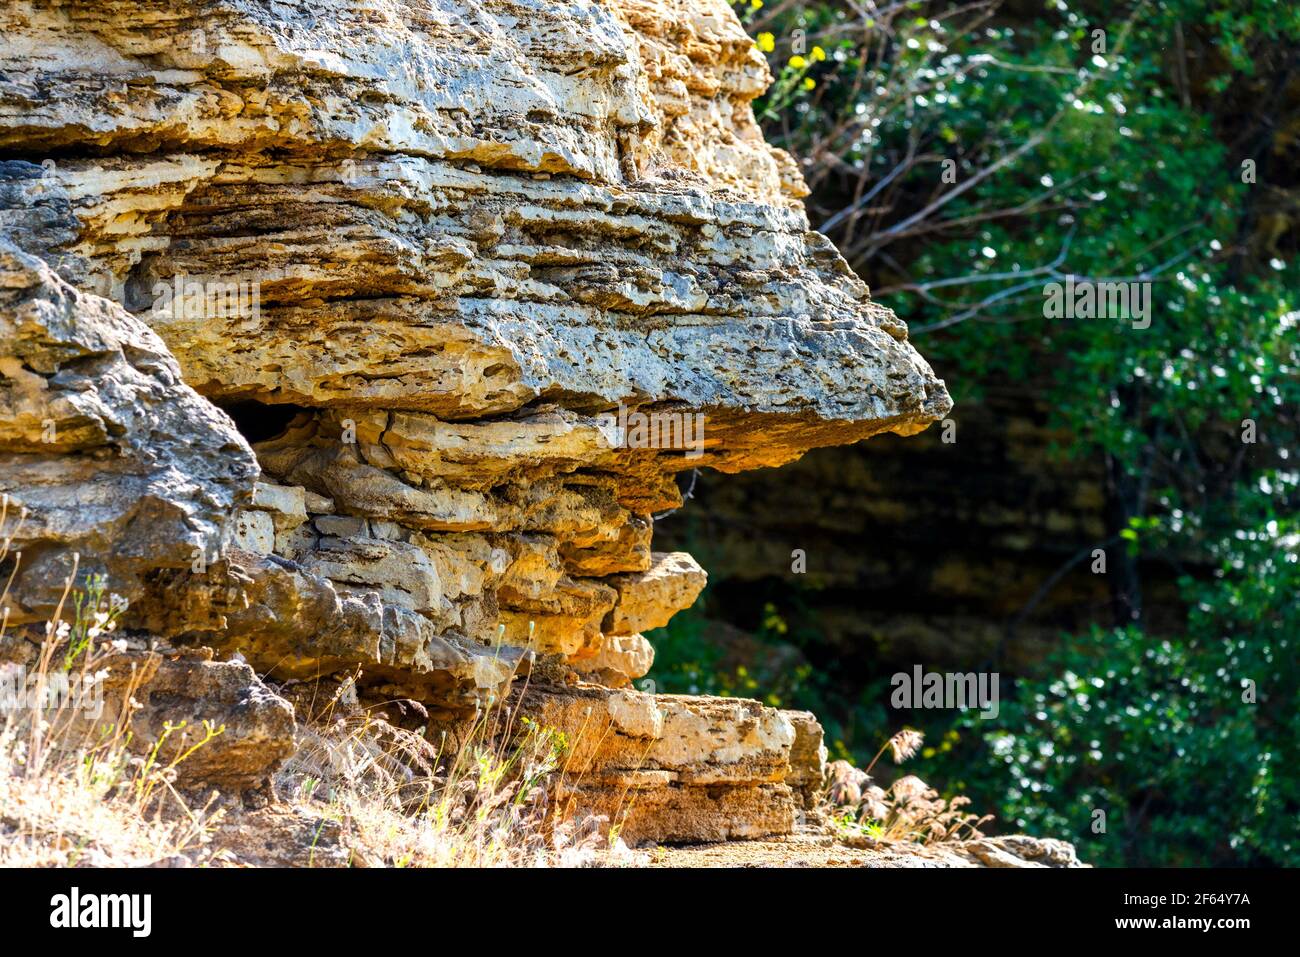 Layers of sedimentary rock outcrops, Sandstone, silt outcrops. Stock Photo